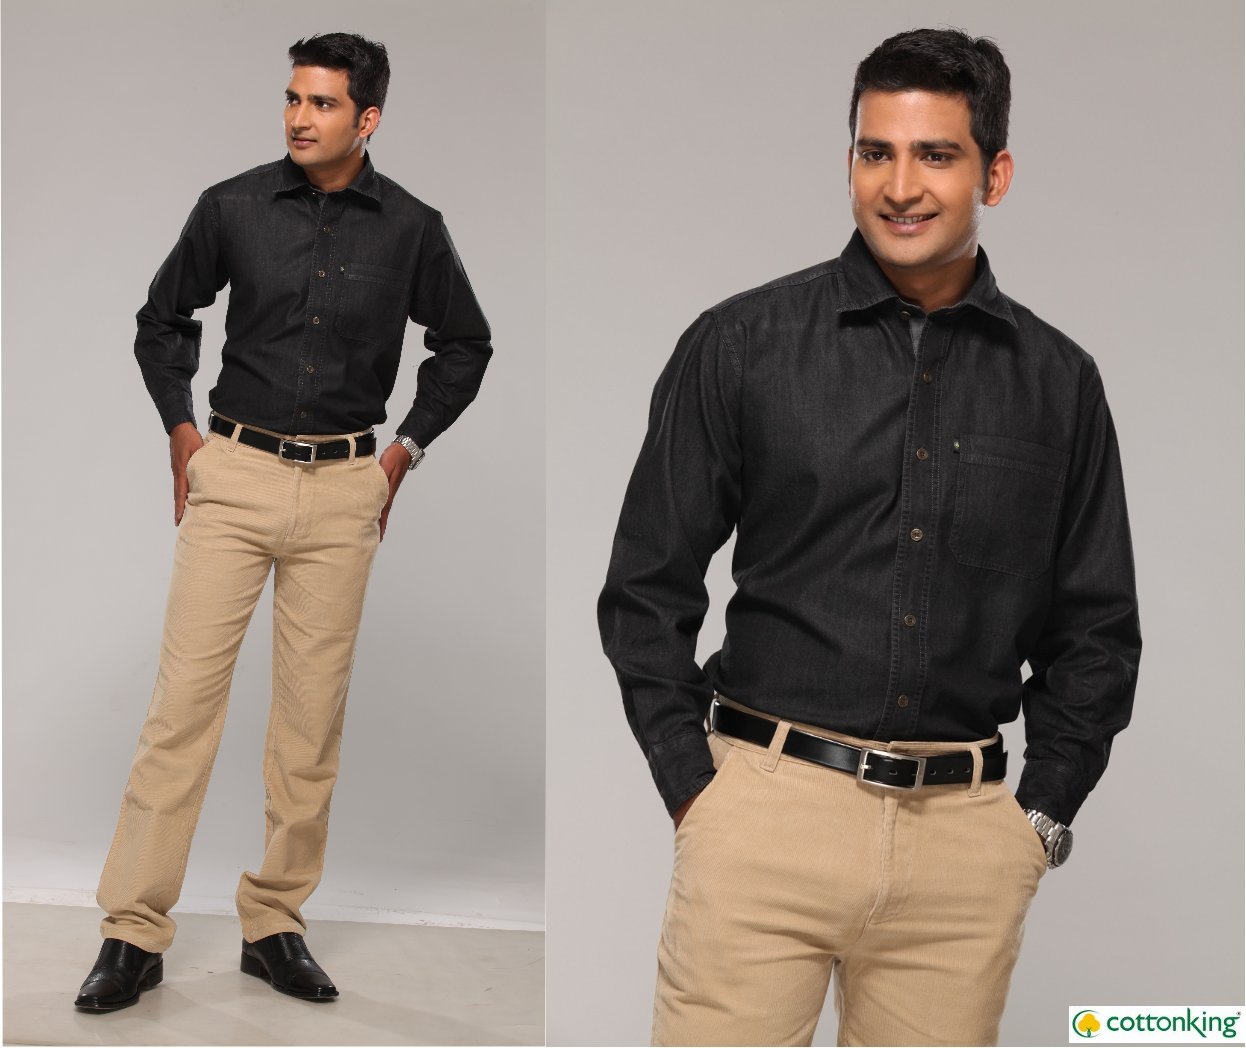 Mens Casual Outfits Jean Shirt Bow Stock Photo 311340599 | Shutterstock